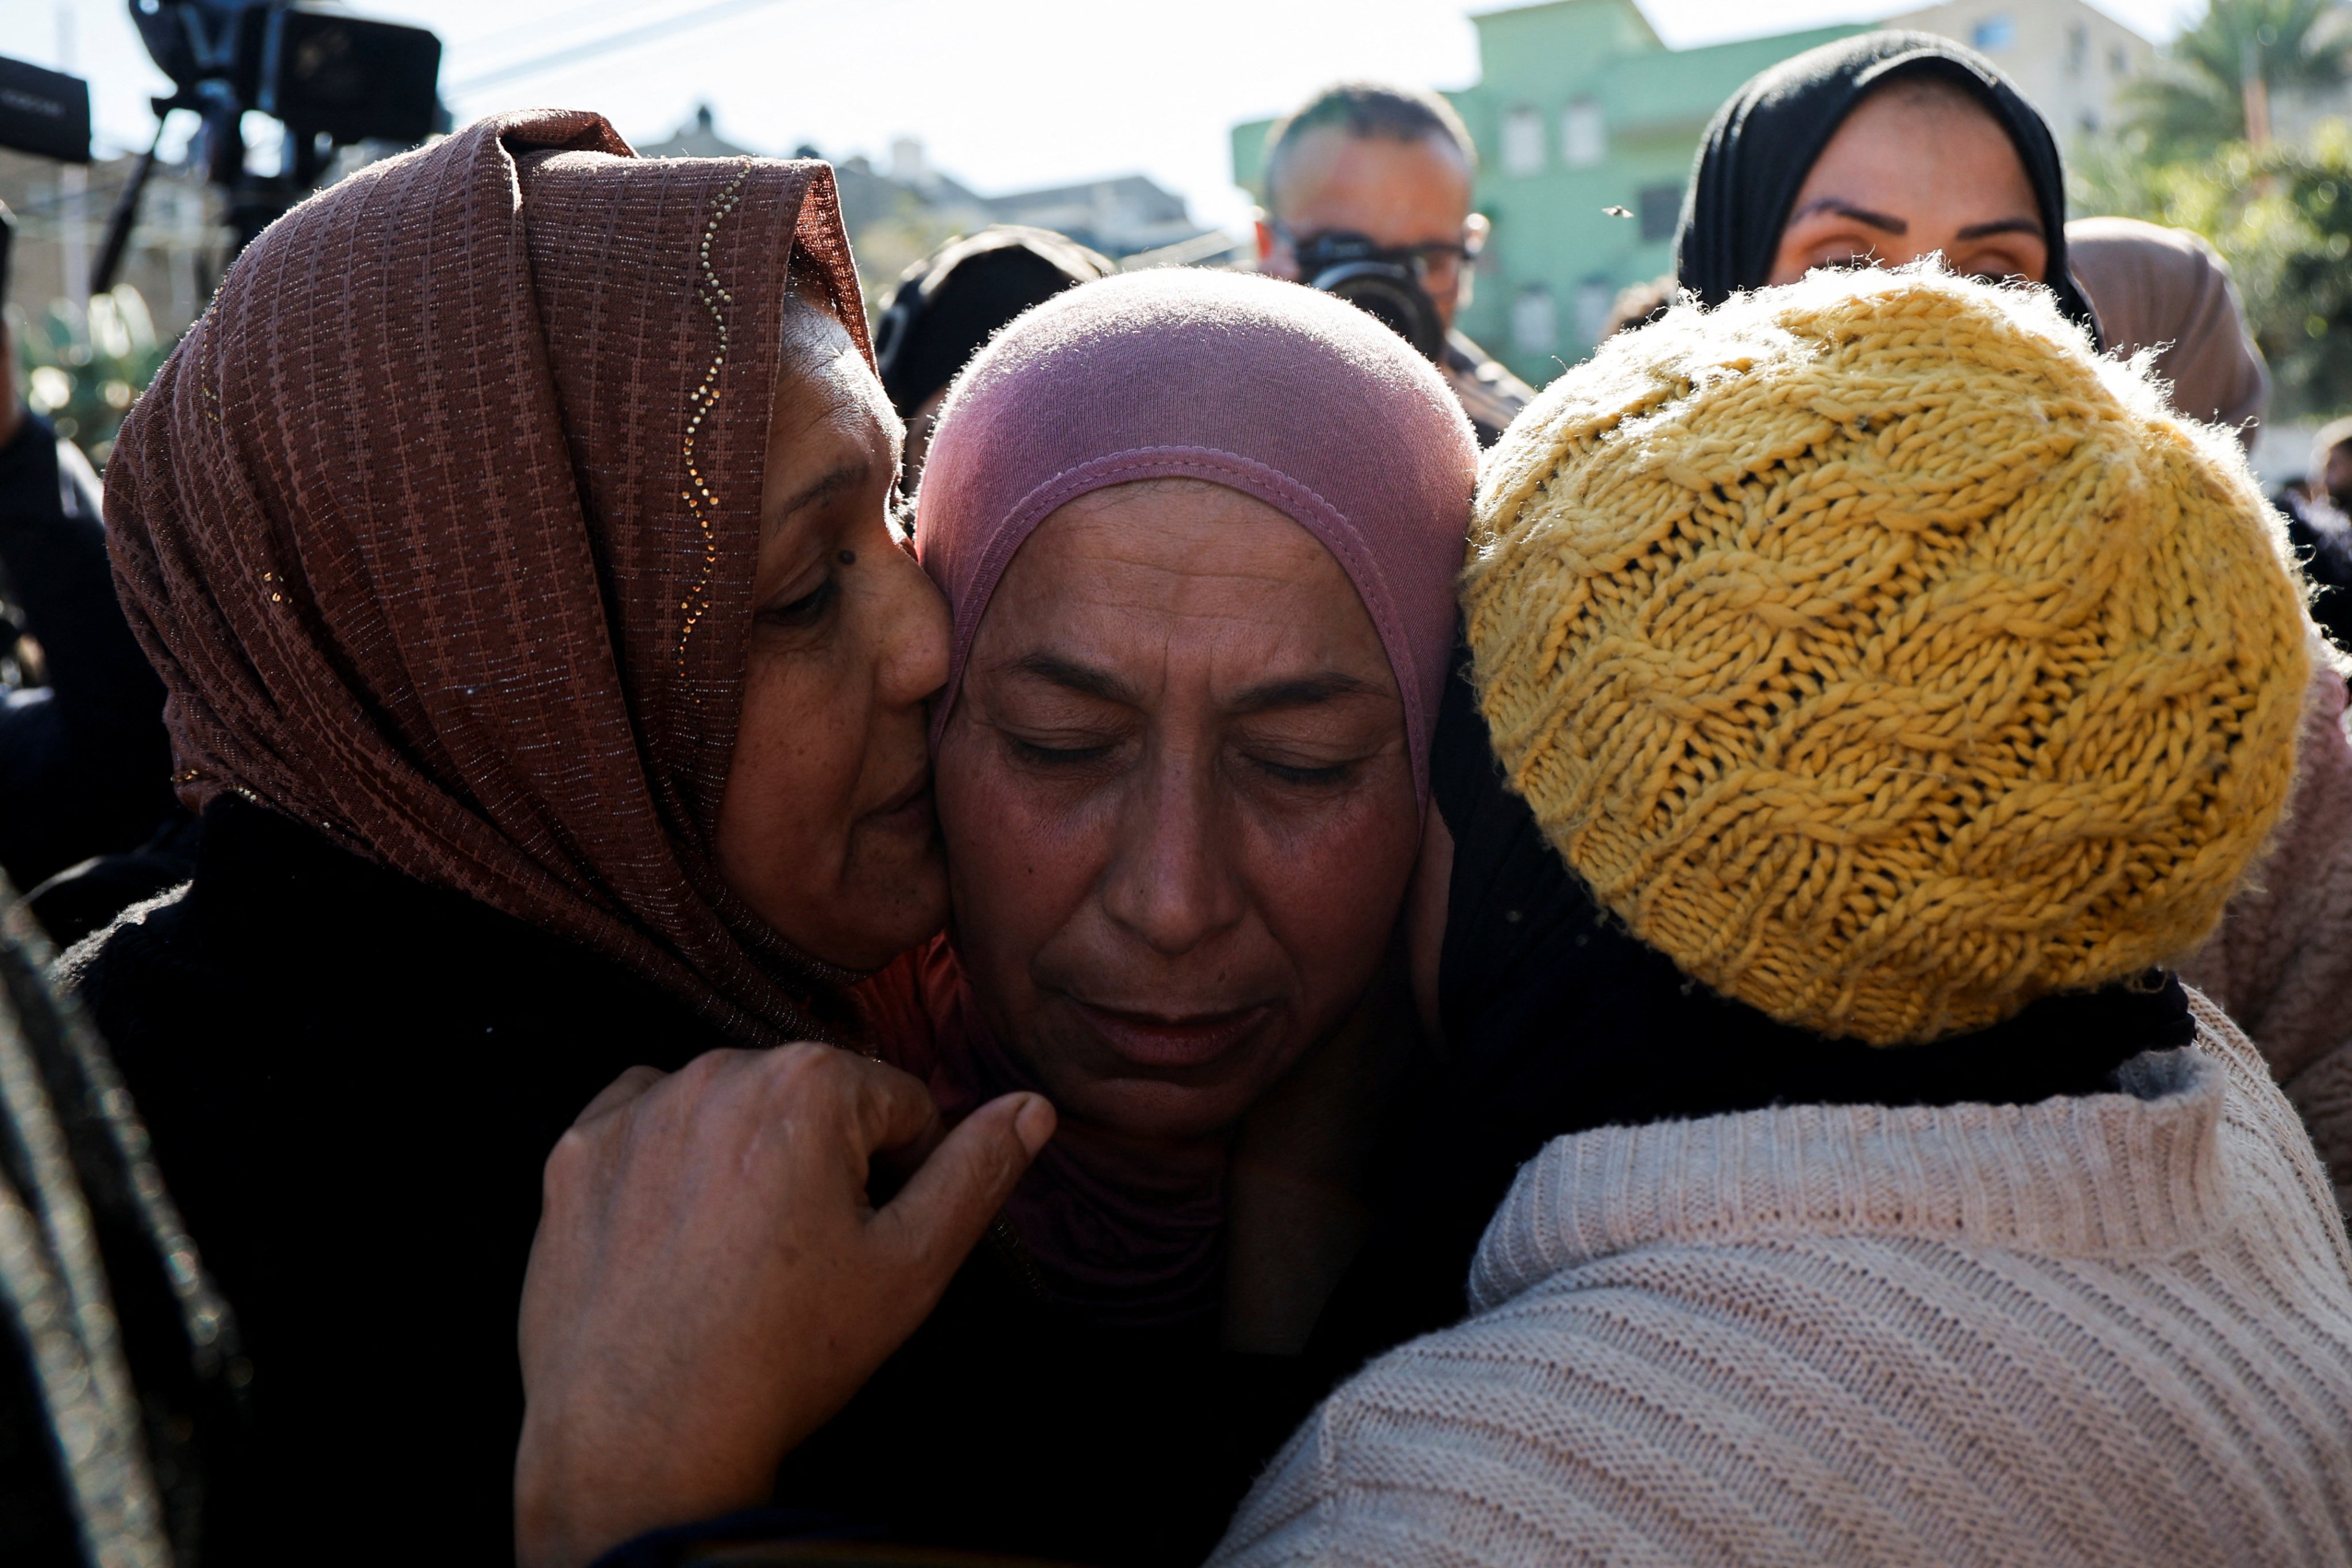 Palestinian women attend a funeral of Palestinians who were killed in an Israeli air strike in Jenin in the Israeli-occupied West Bank. Photo: Reuters